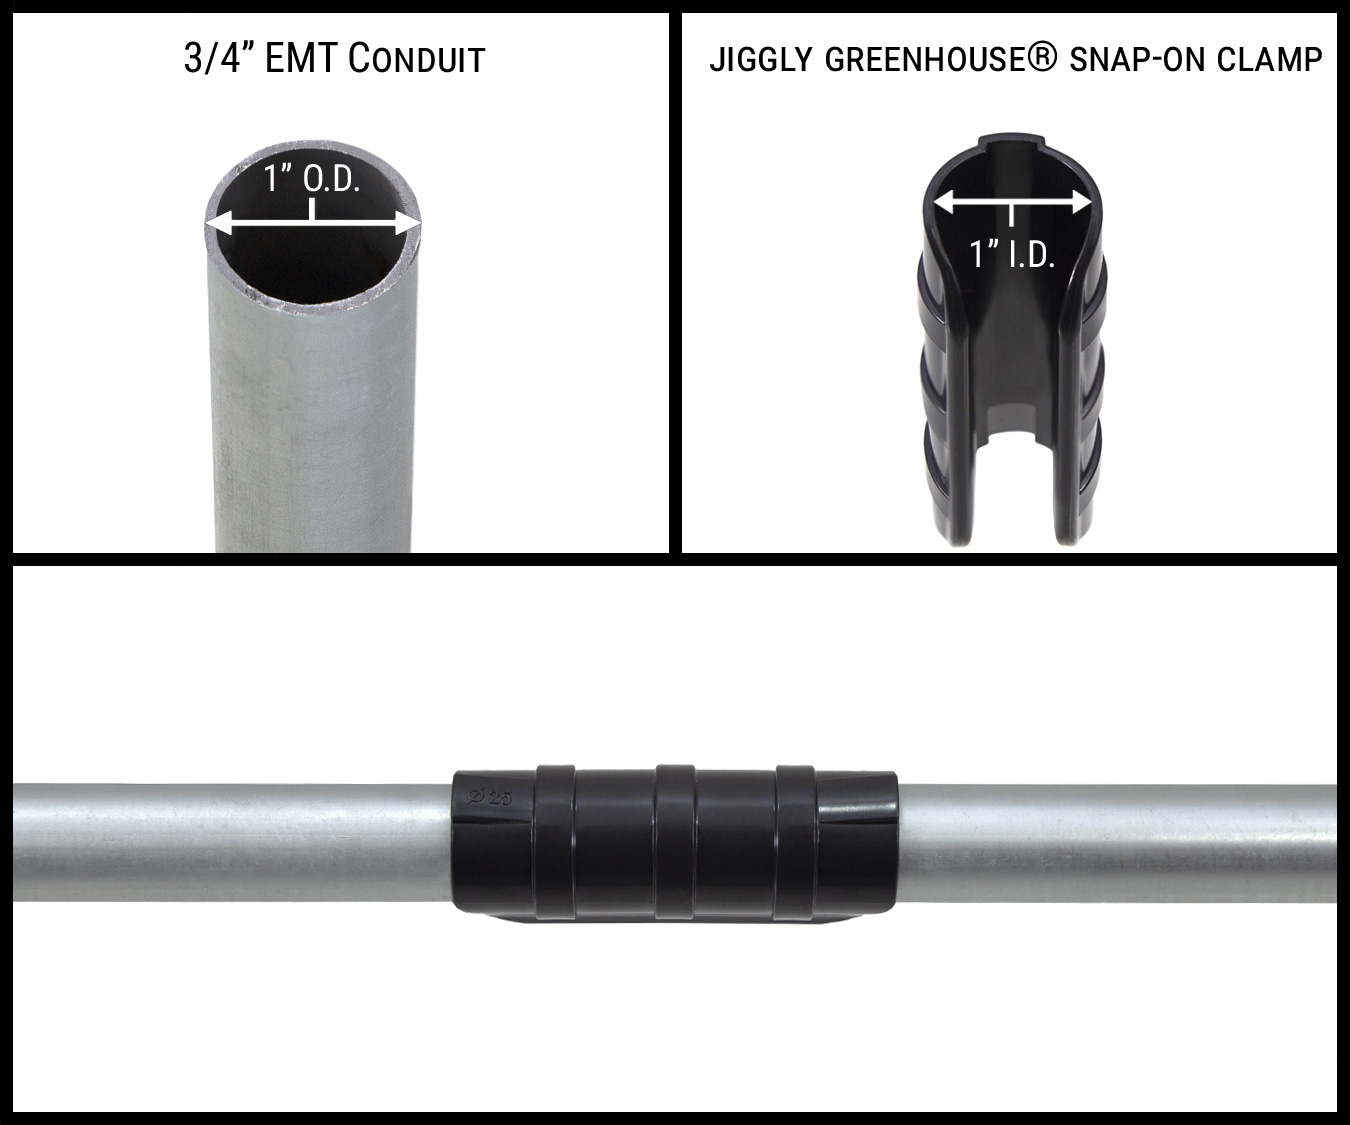 Jiggly Greenhouse® Snap-On Clamp EMT Conduit Fitting Diagram